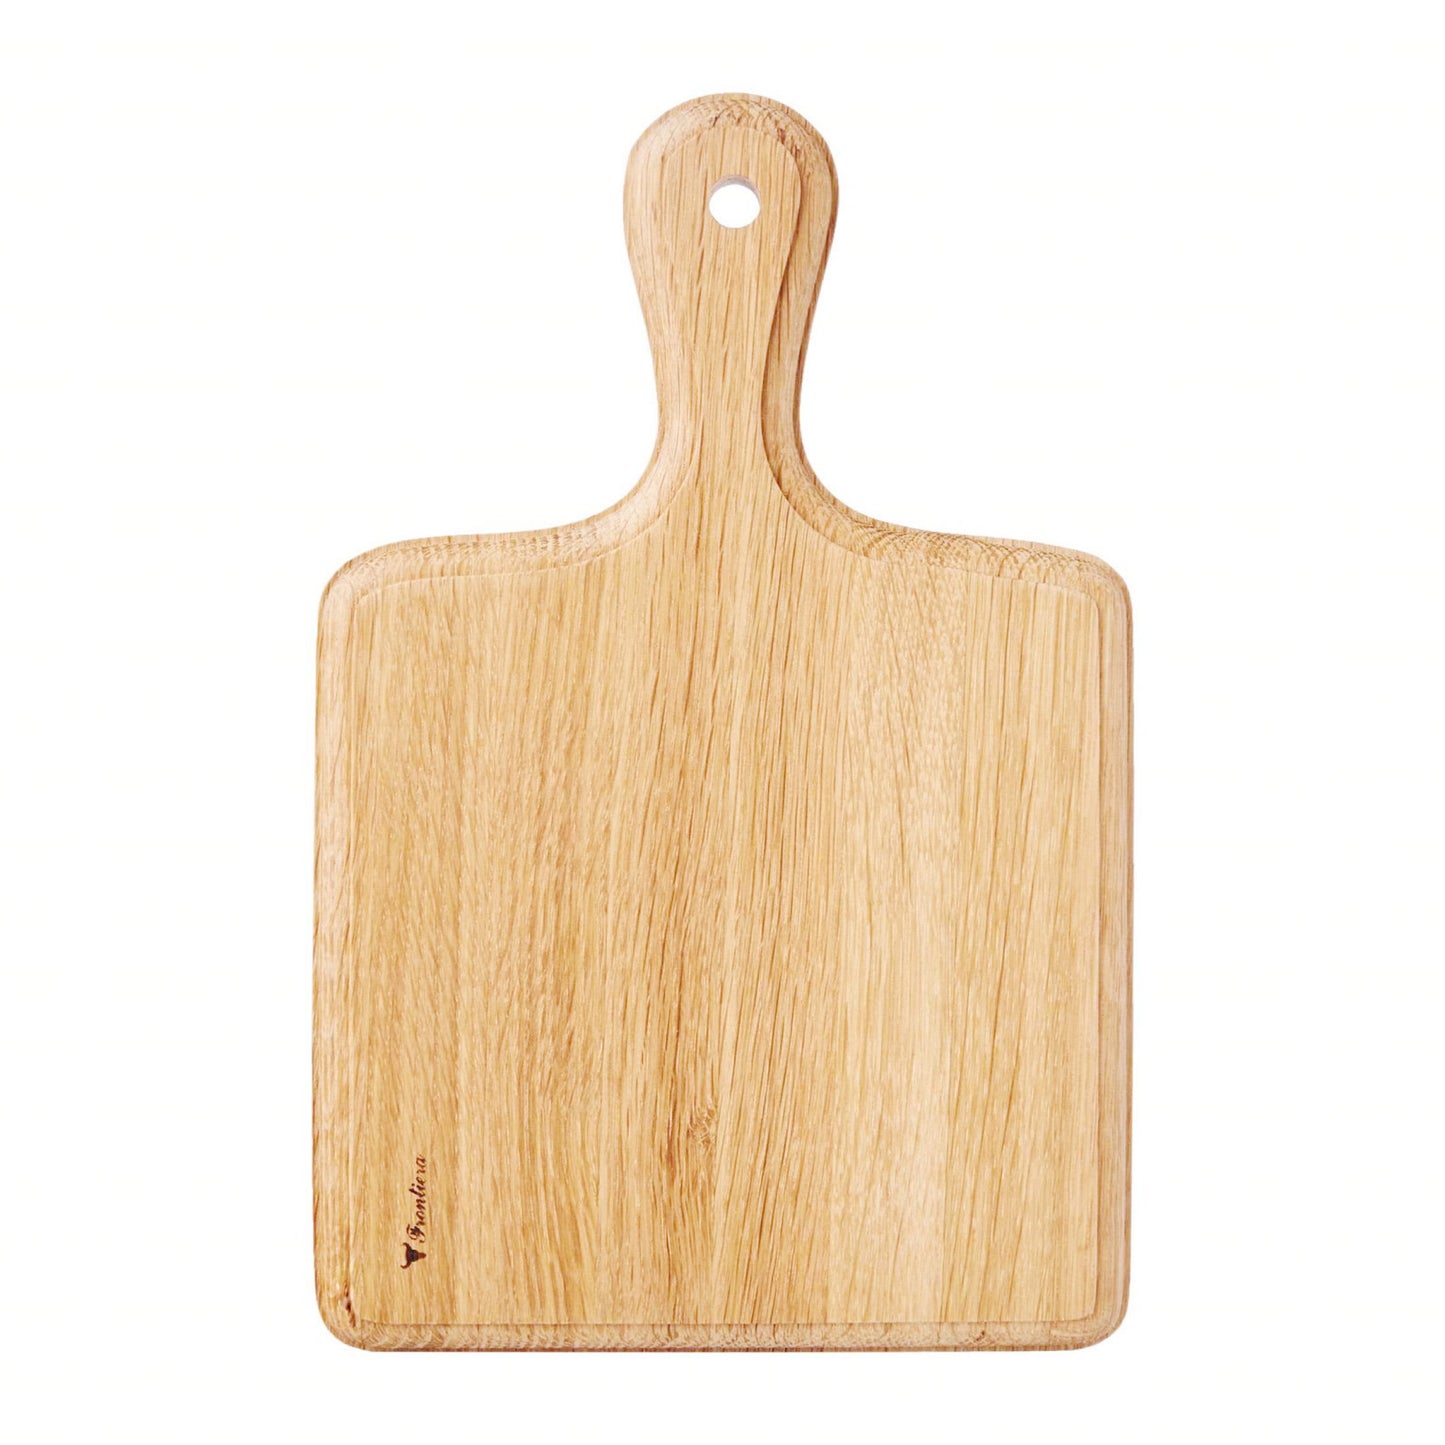 Frontiera Natural Wood Cheese board (Short) 246mm 𝟓𝟎% 𝐎𝐅𝐅